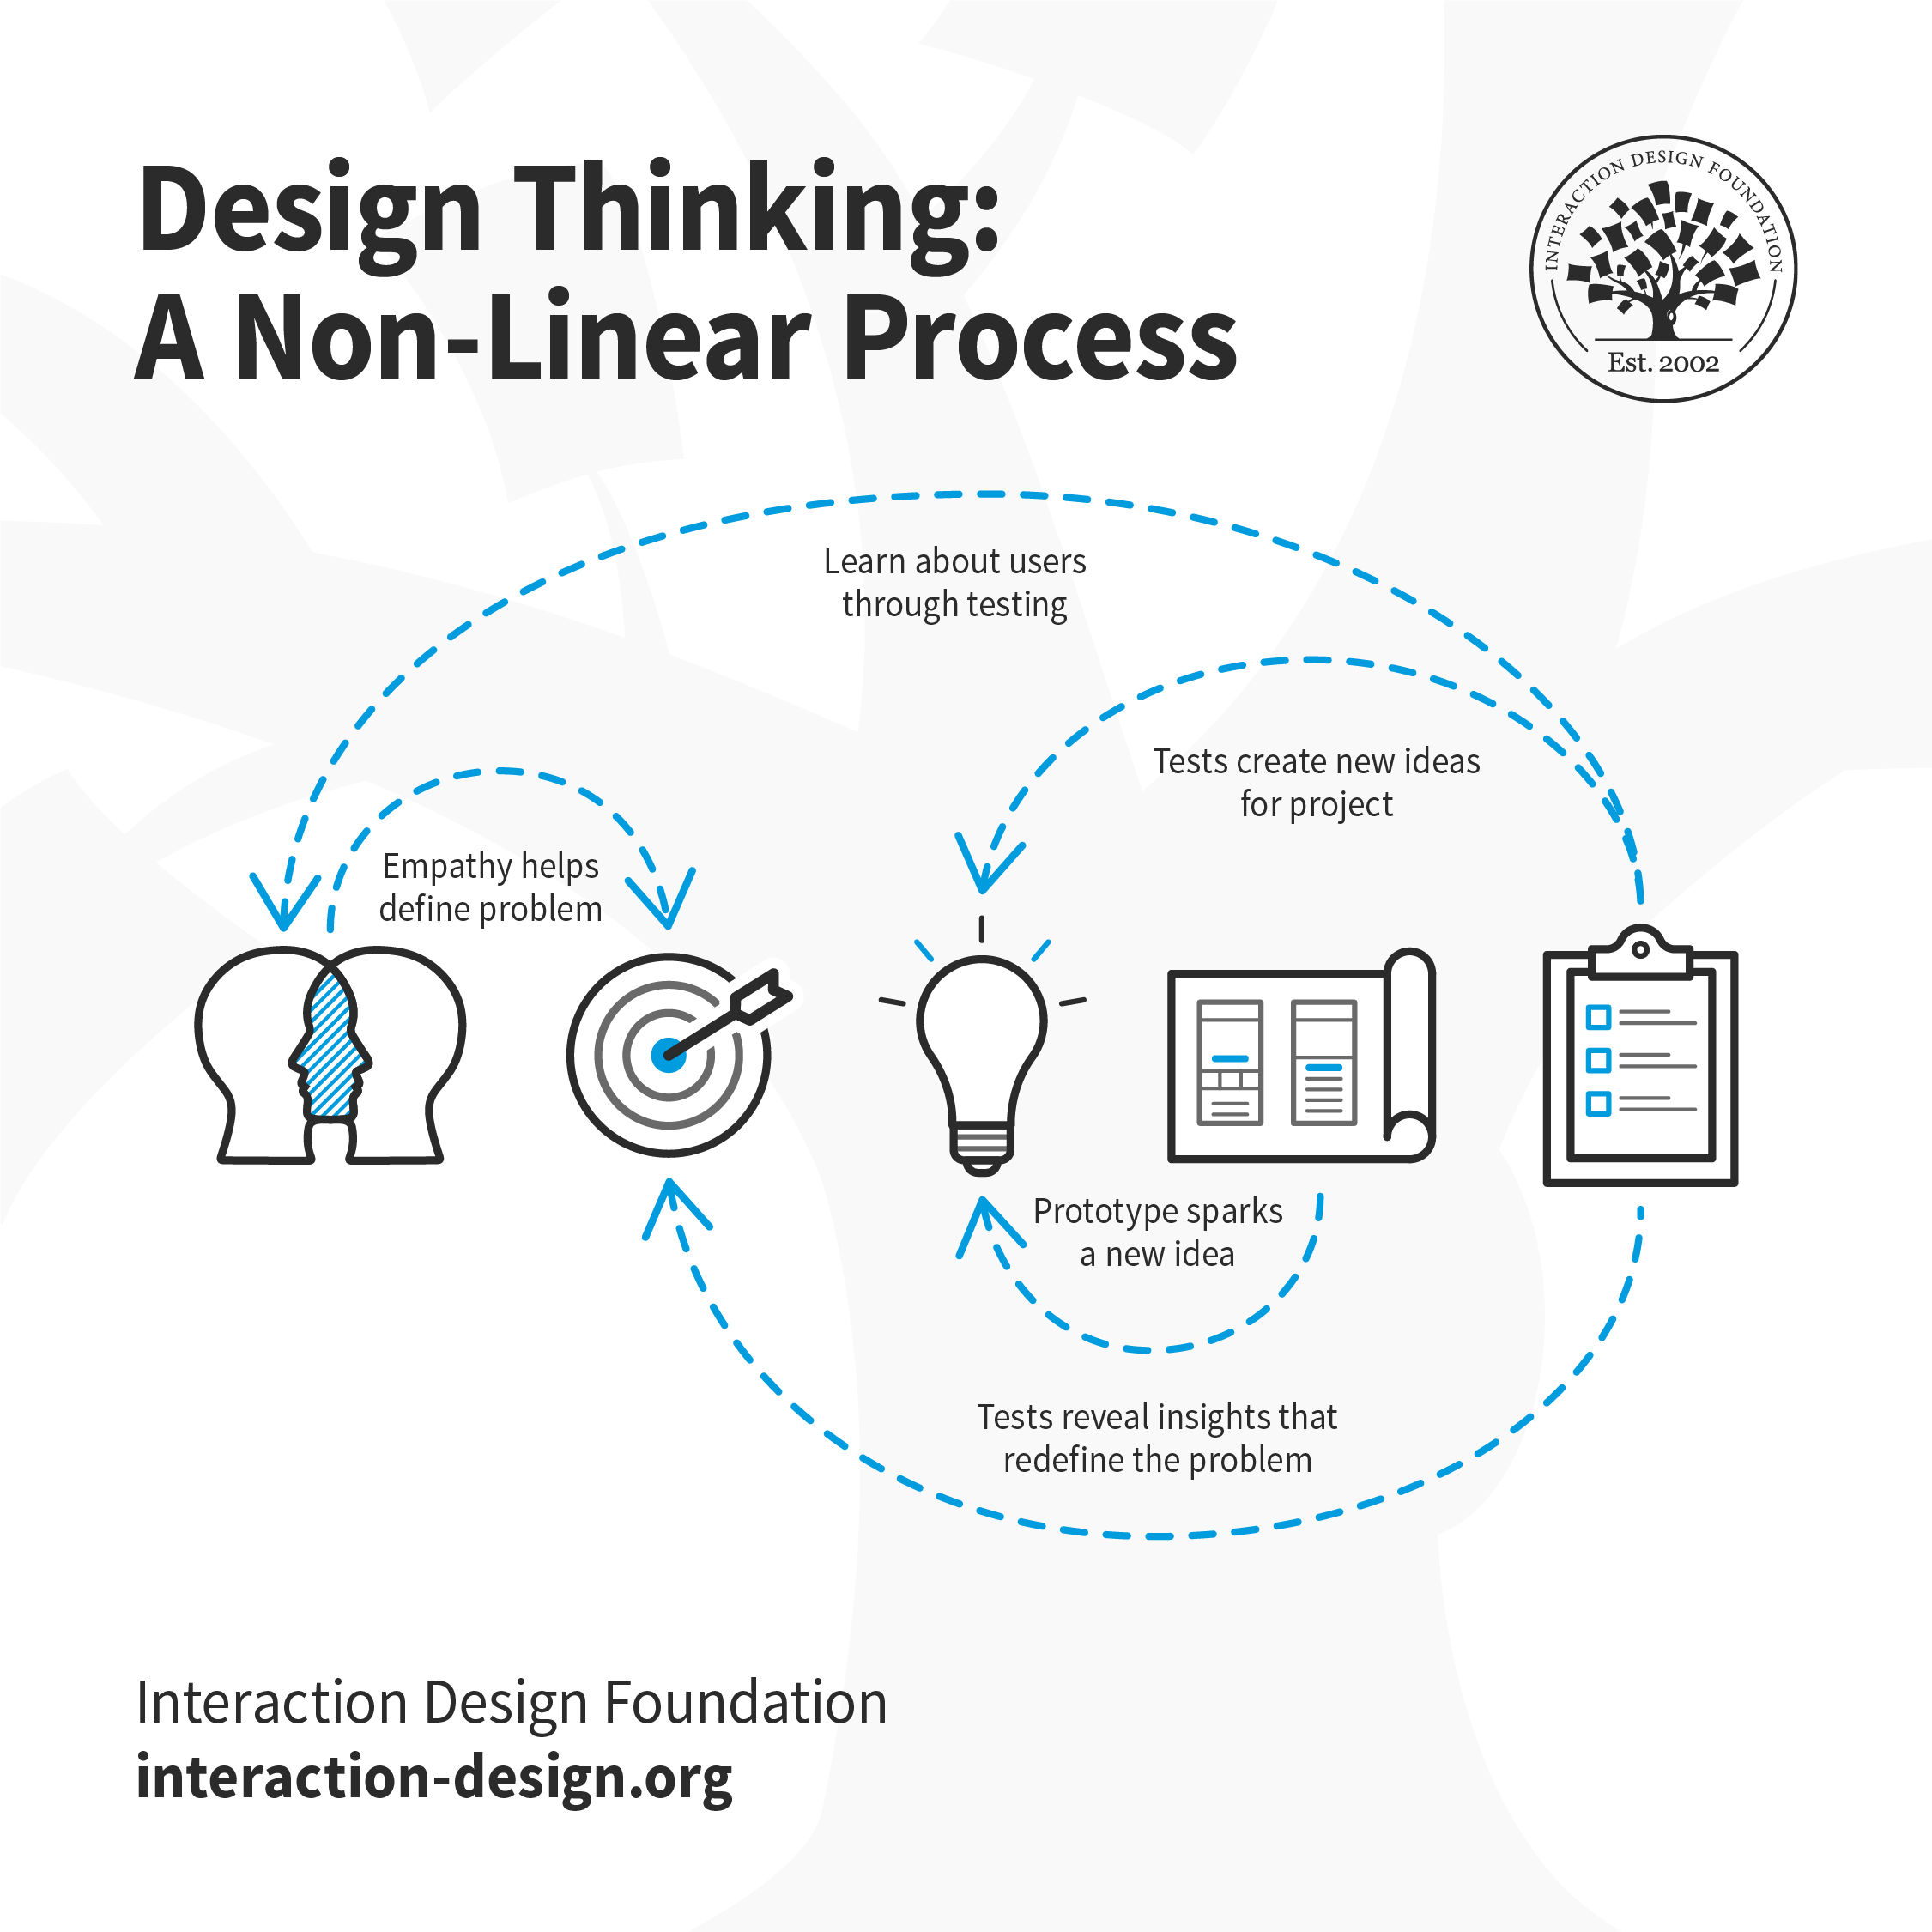 A diagram showing the Design Thinking process.